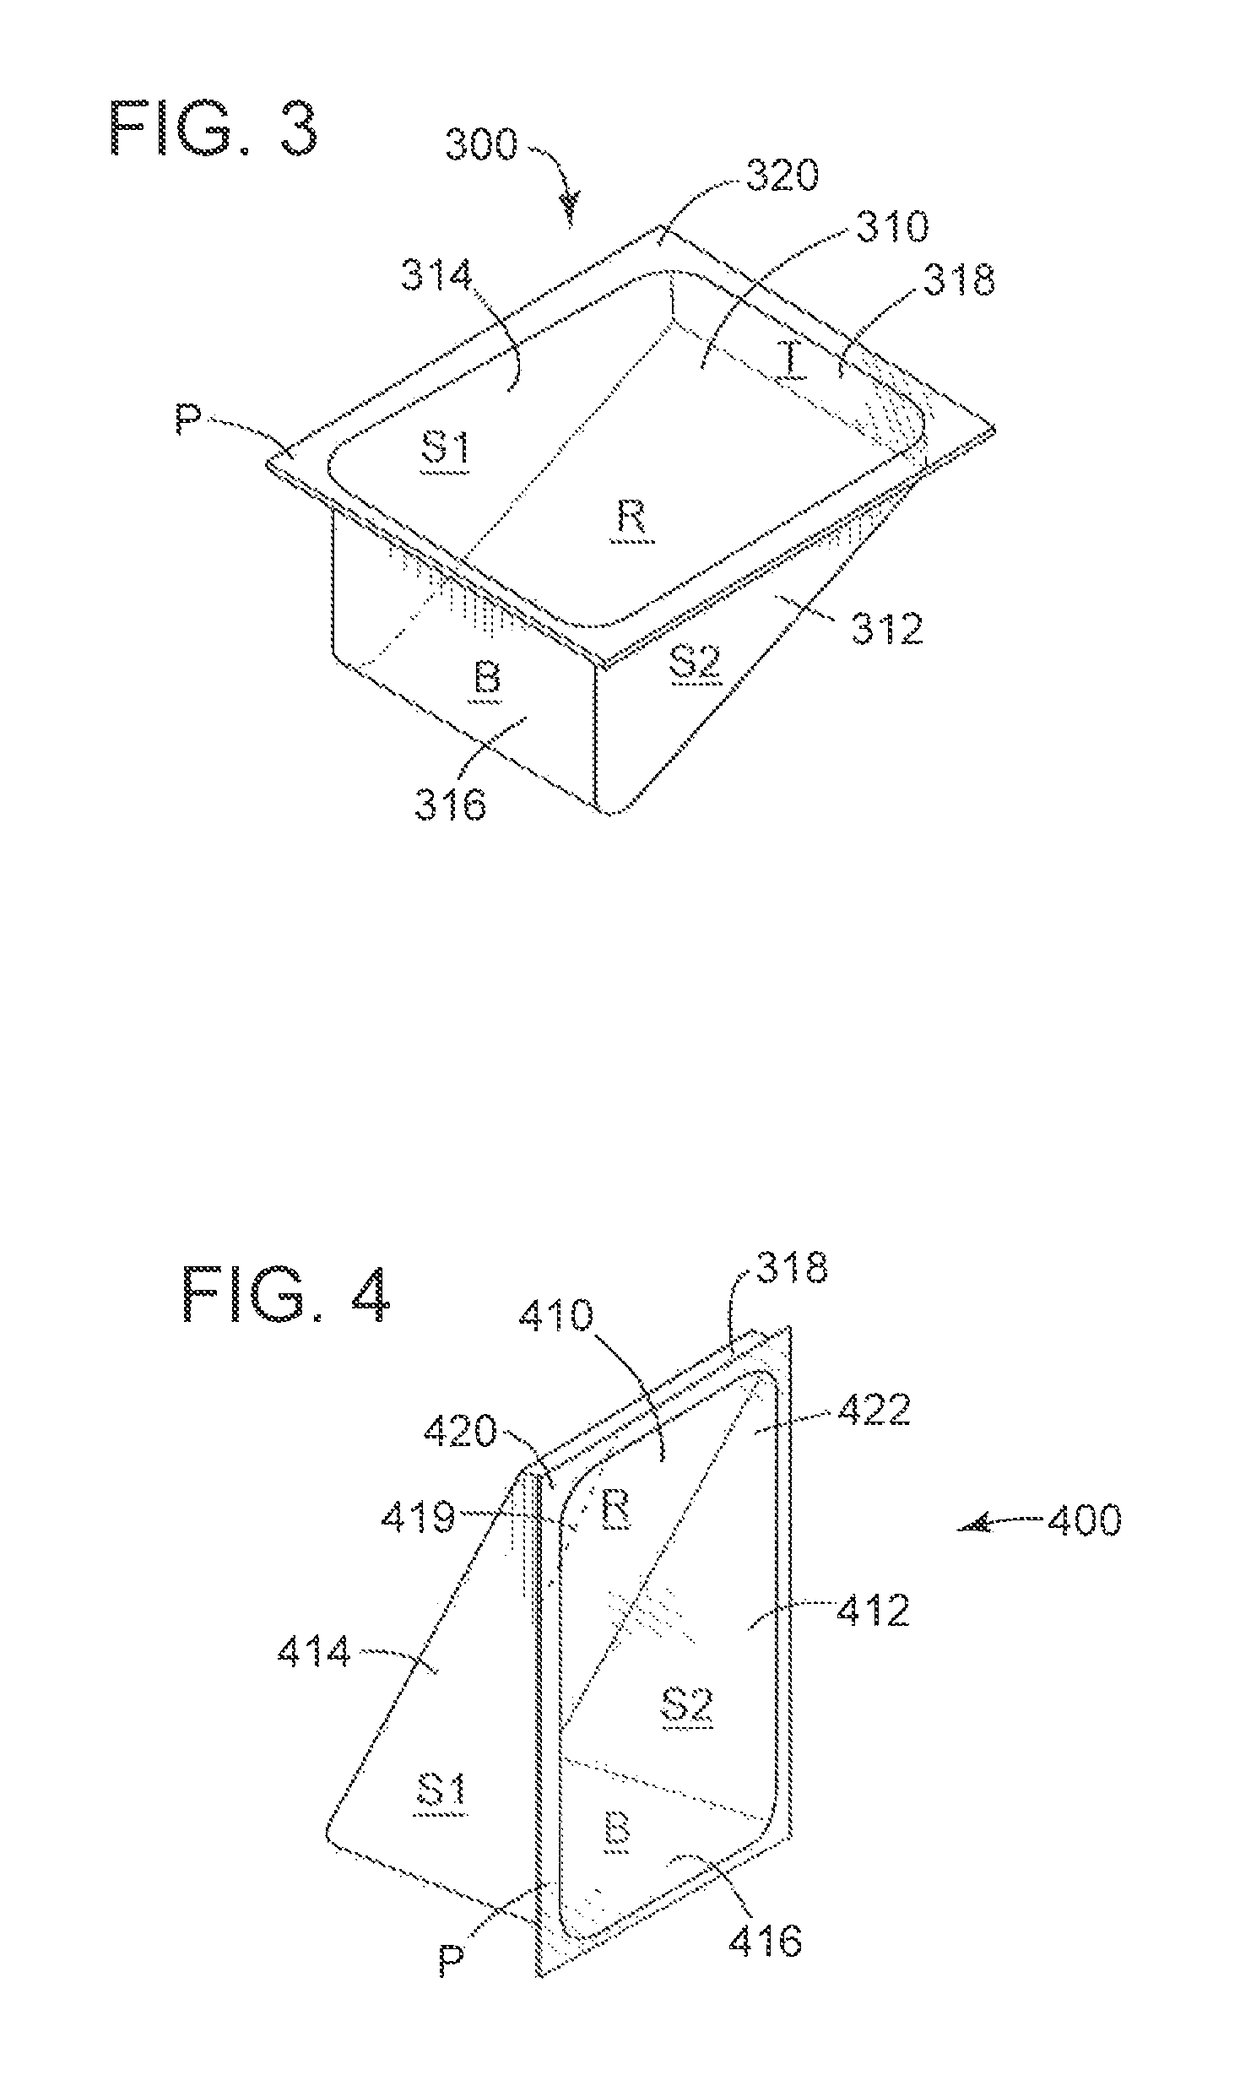 Thermoformed flexible dispensing container with integrally formed flat bottom for a stand-up configuration